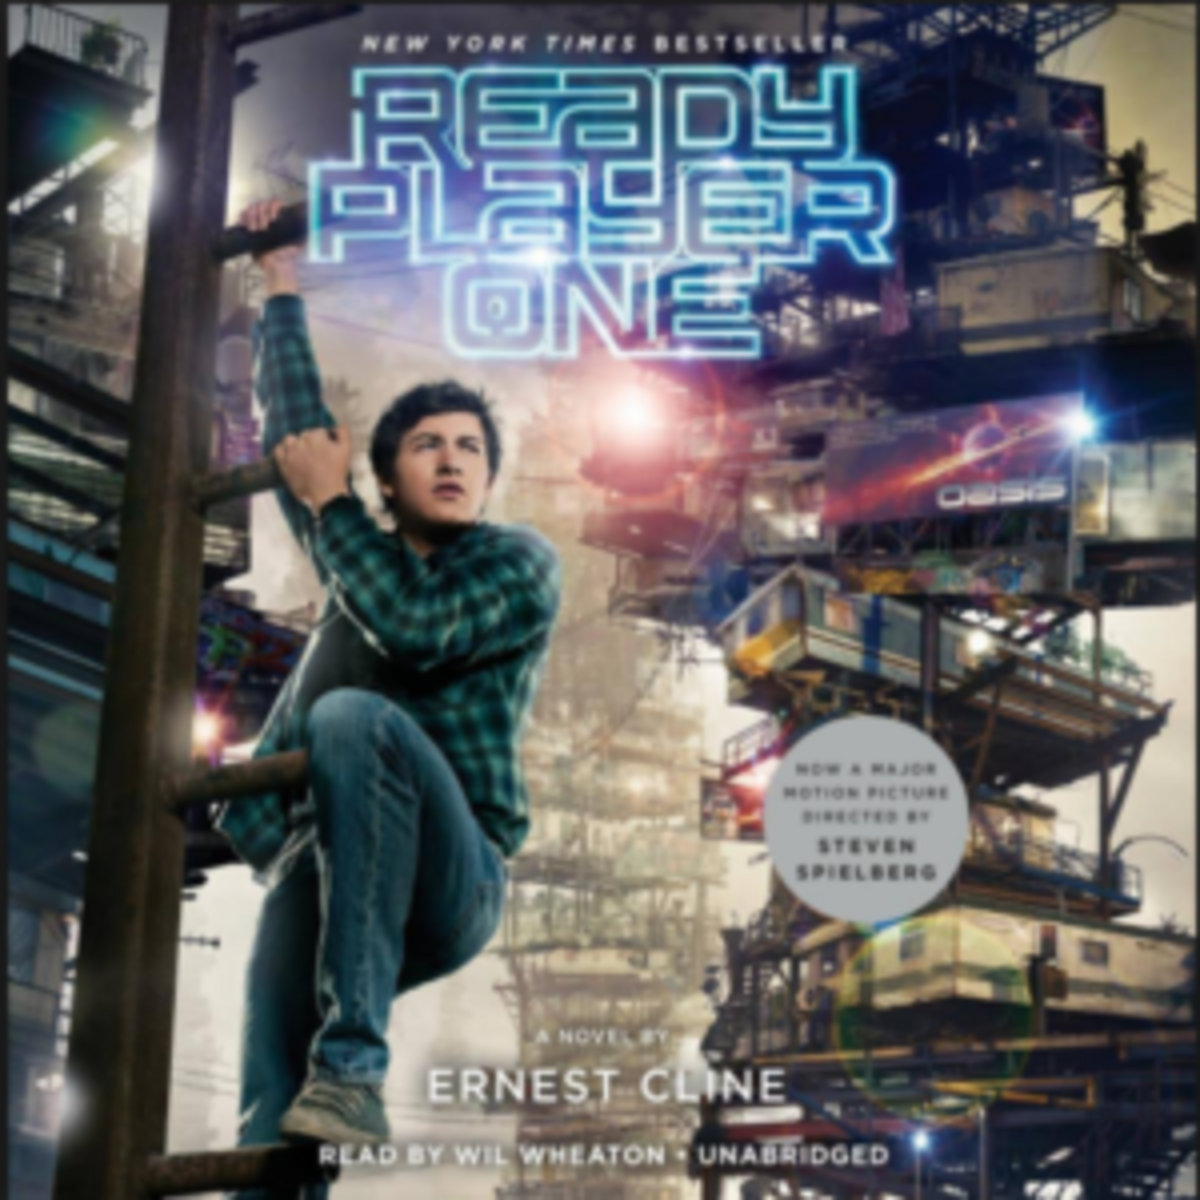 Ready Player One - A Novel by Ernest Cline - First printing - 2011 - from  Tangible Tales (SKU: 1645)